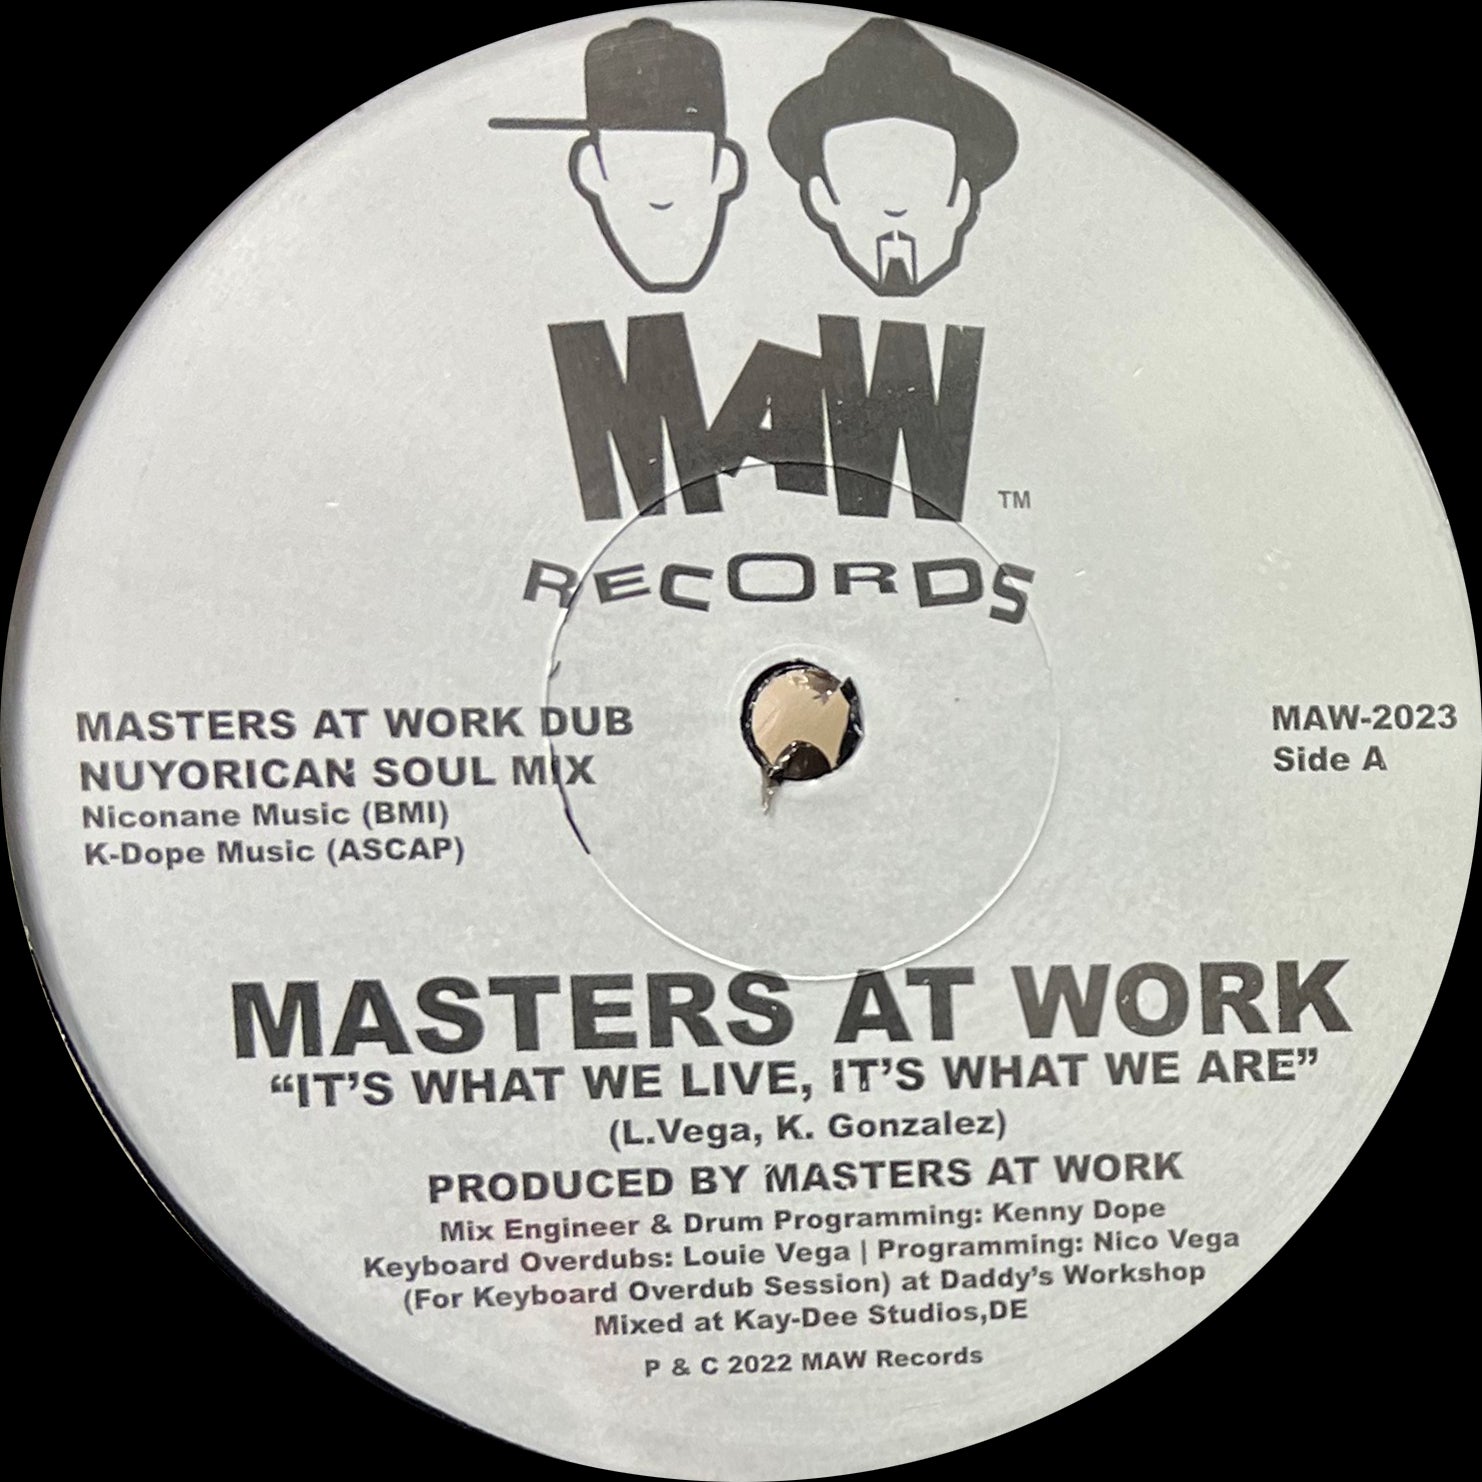 MASTERS AT WORK 'IT'S WHAT WE LIVE, IT'S WHAT WE ARE 12"